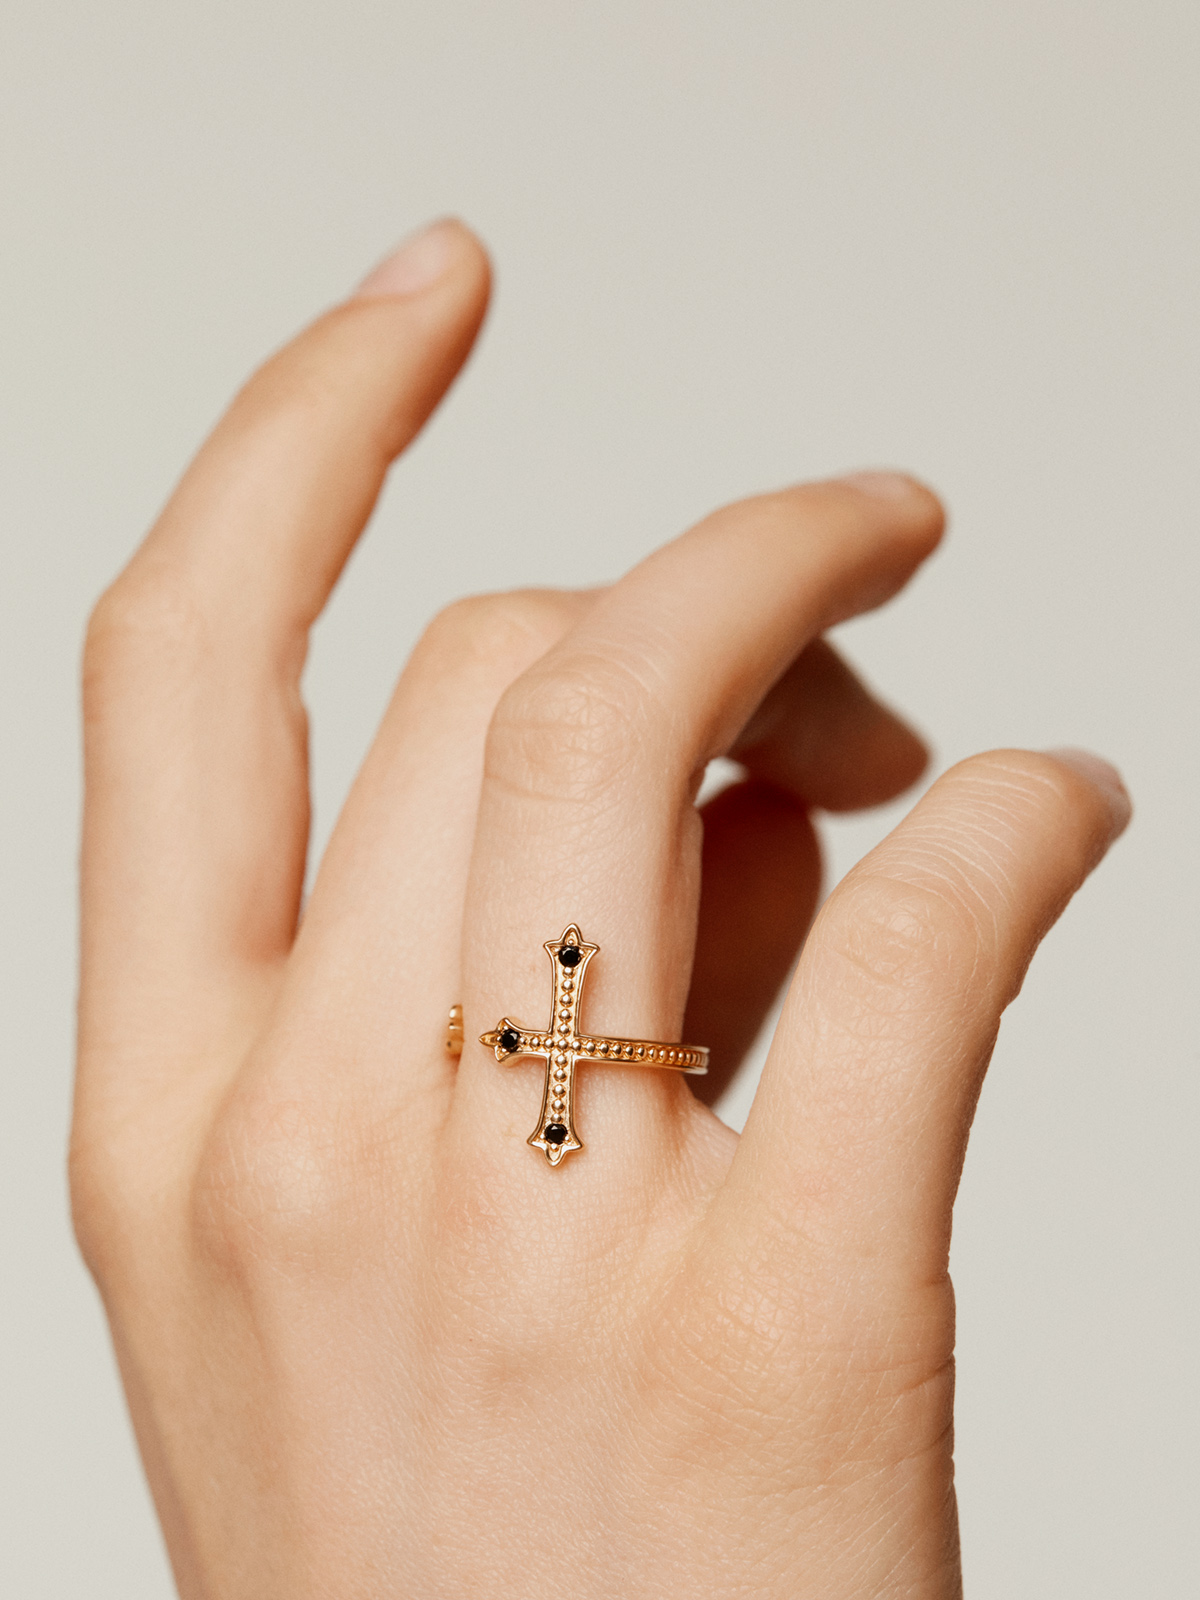 You and Me ring made of 925 silver, bathed in 18K yellow gold, cross-shaped with black spinels.